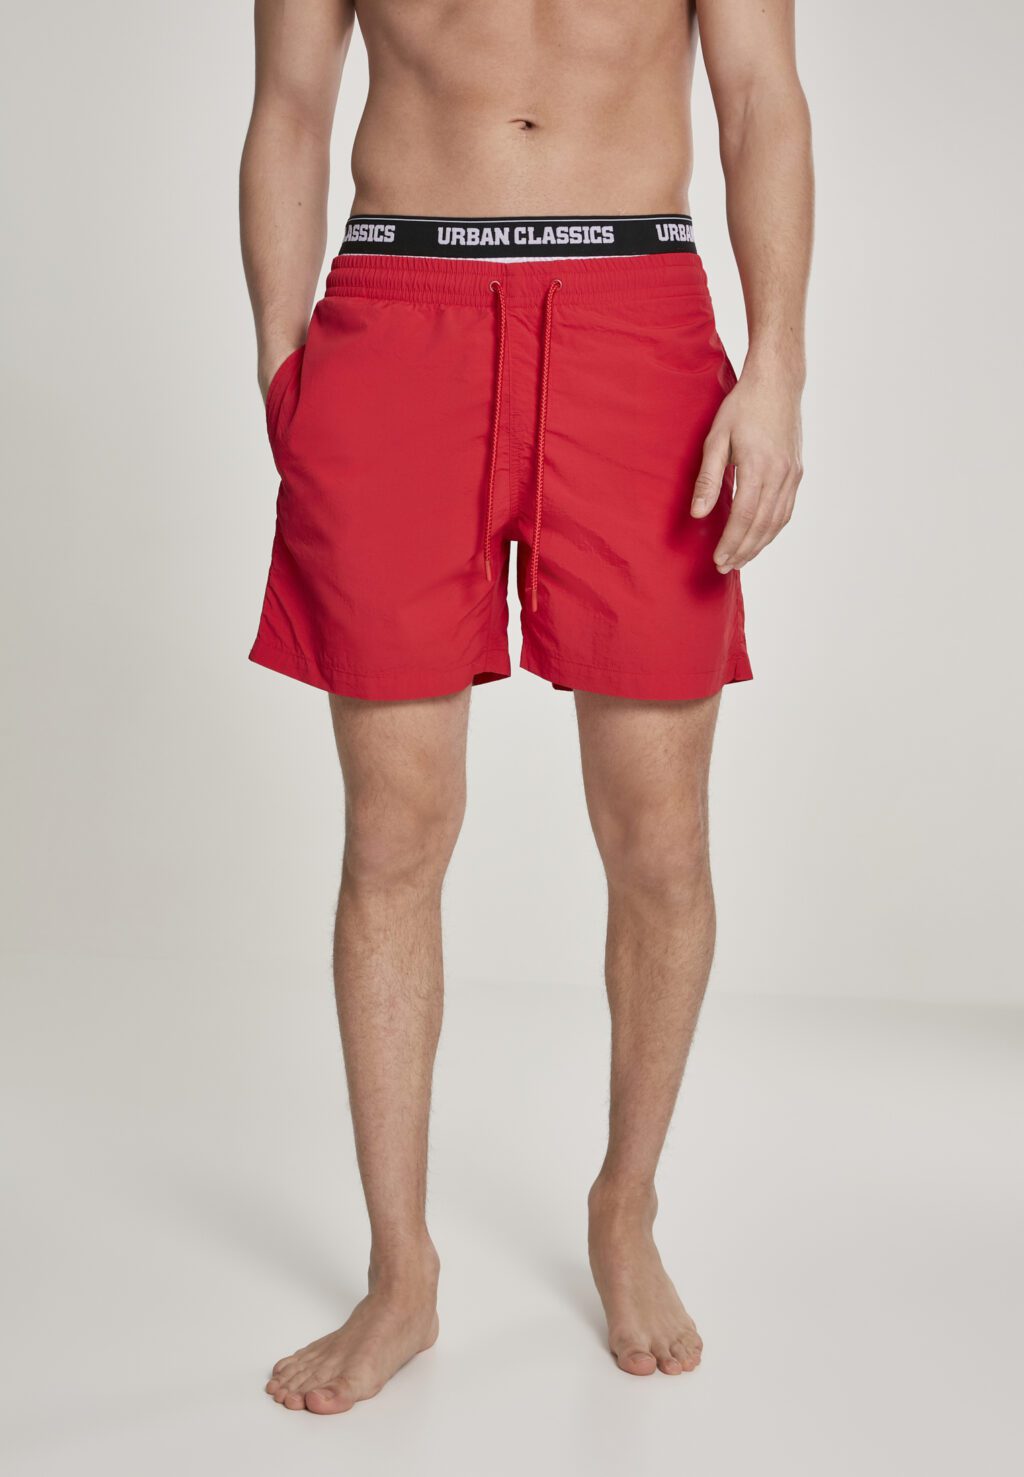 Urban Classics Two in One Swim Shorts firered/wht/blk TB2683